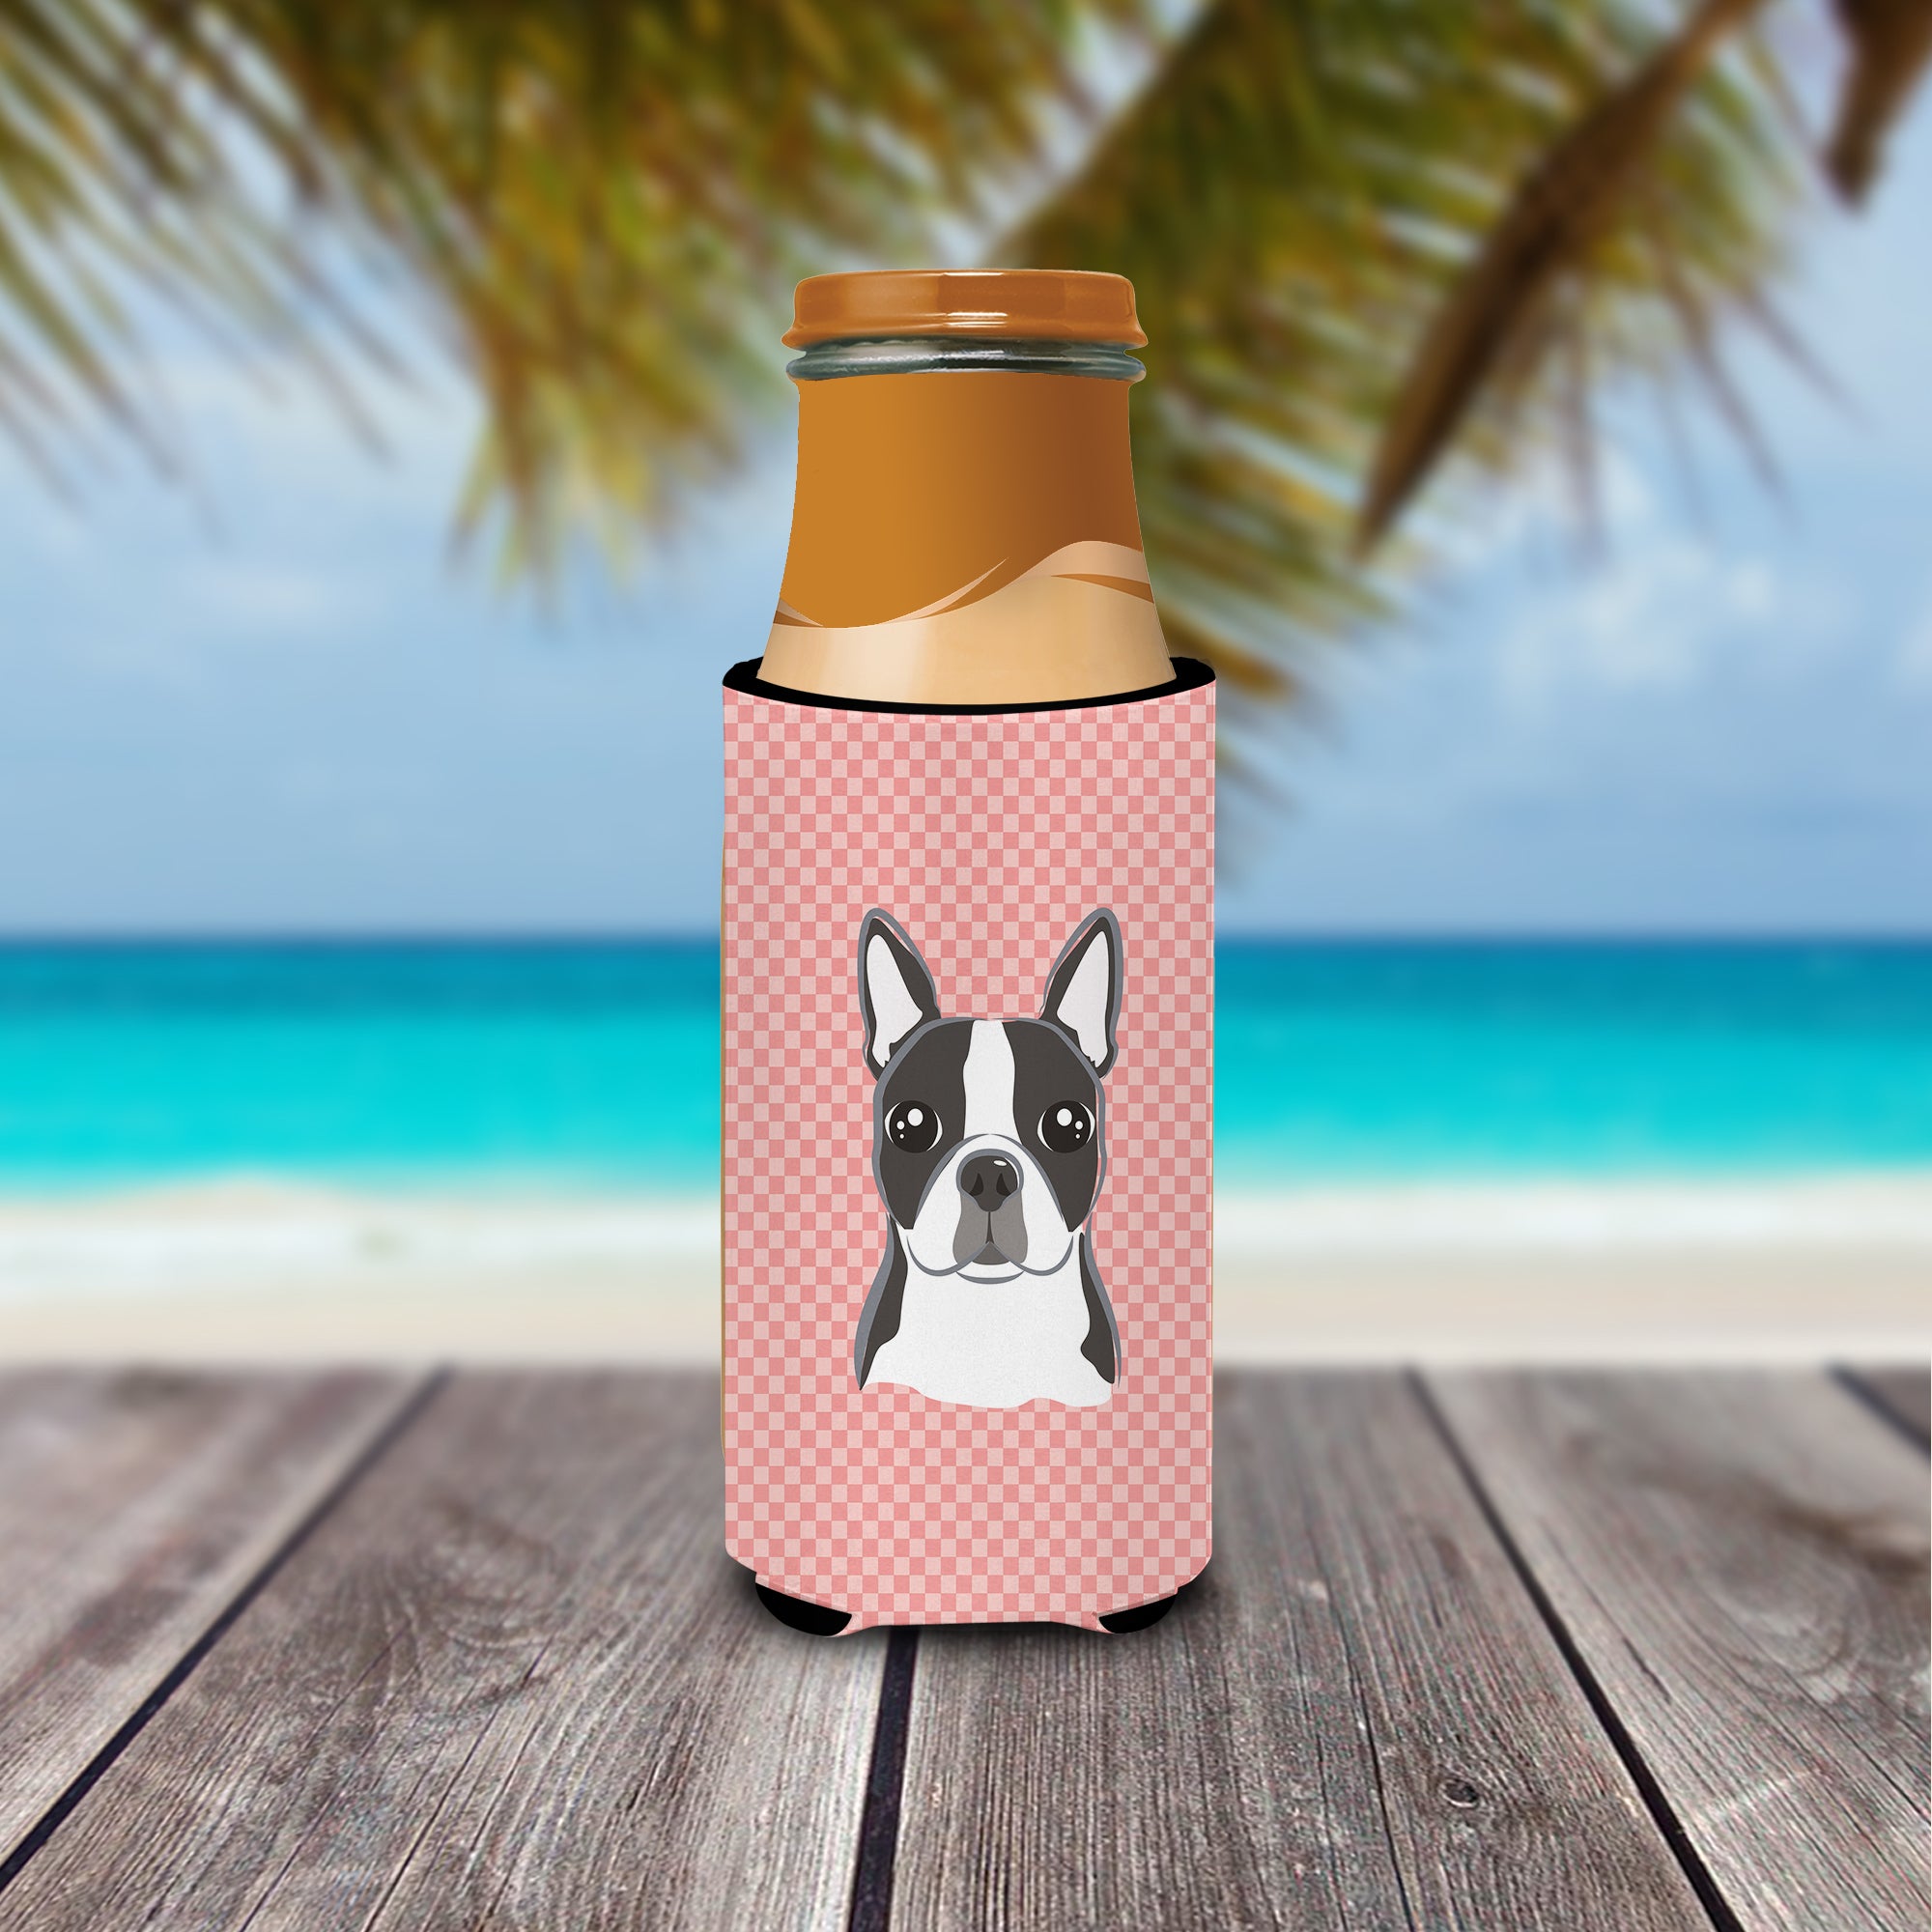 Checkerboard Pink Boston Terrier Ultra Beverage Insulators for slim cans BB1203MUK.